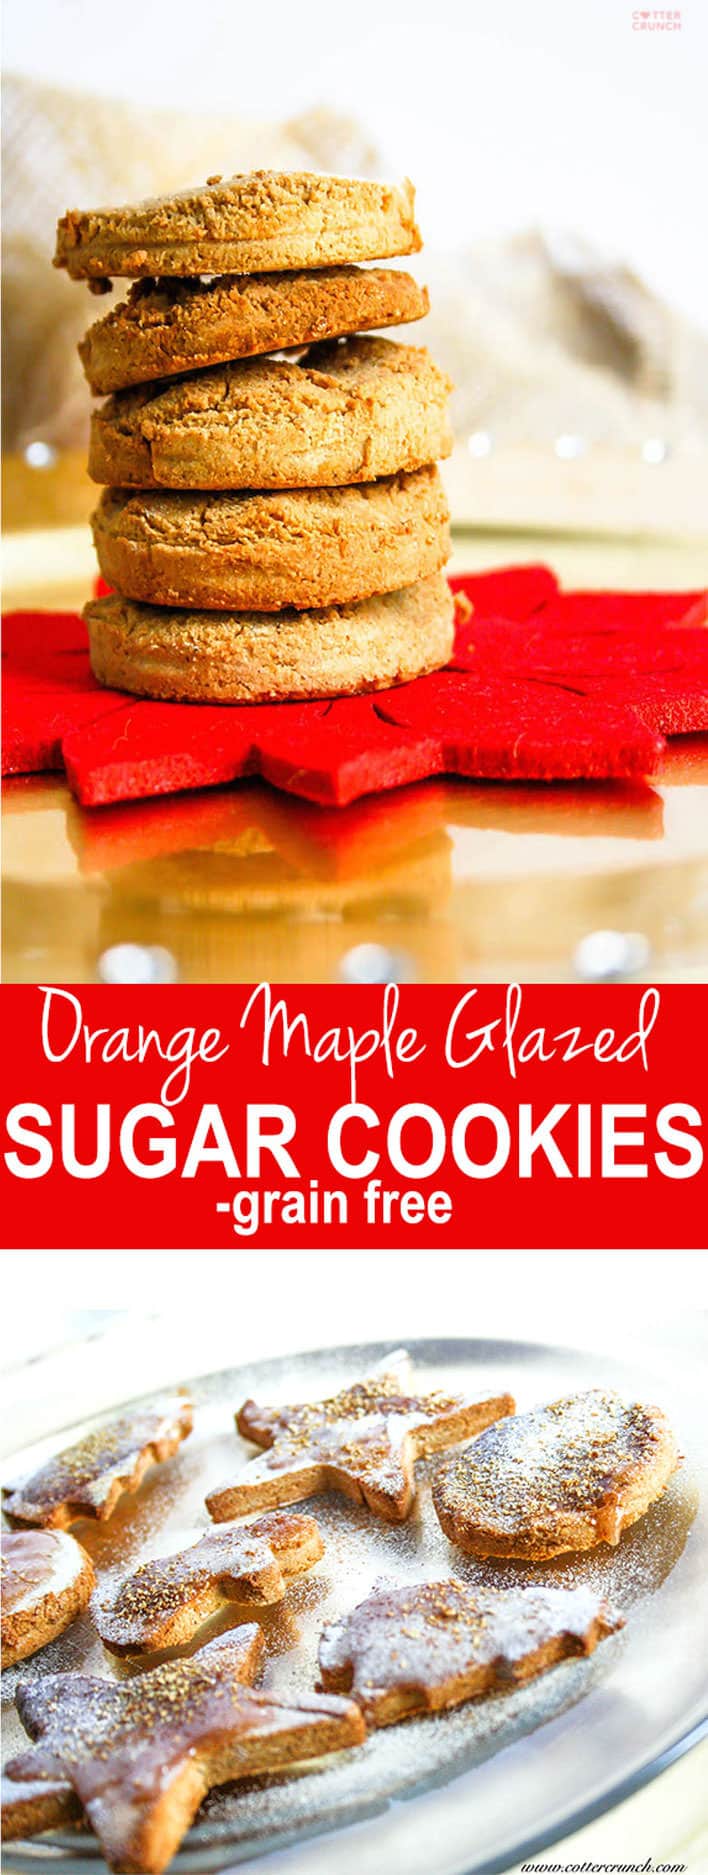 A sweet and refreshing twist on your average holiday cookie! Grain Free and Paleo friendly! Orange Maple glazed sugar cookies are great for sharing.